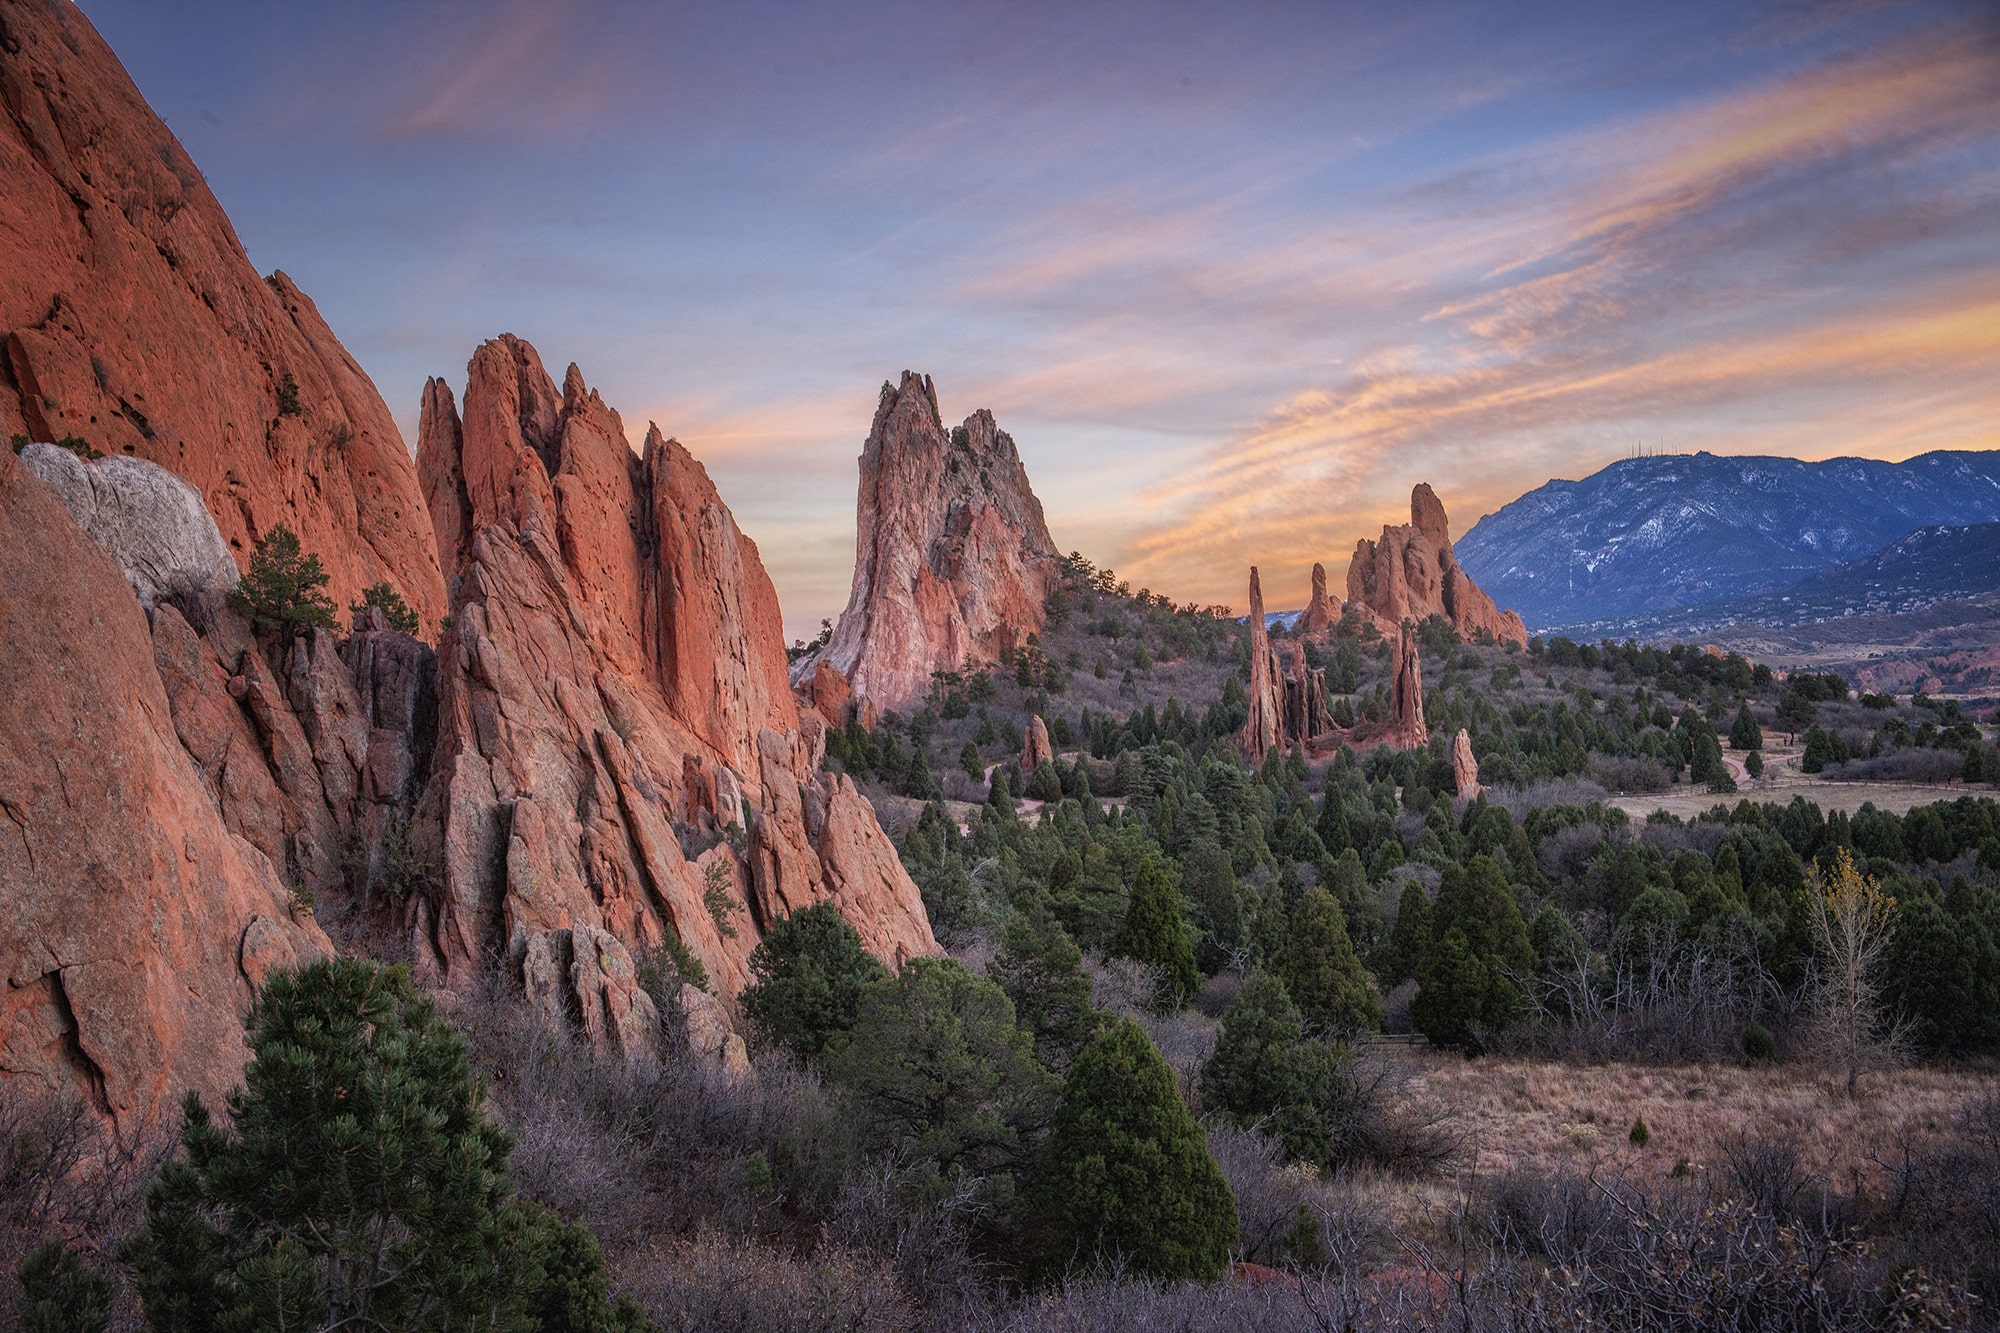 Rock formations at Garden of the Gods